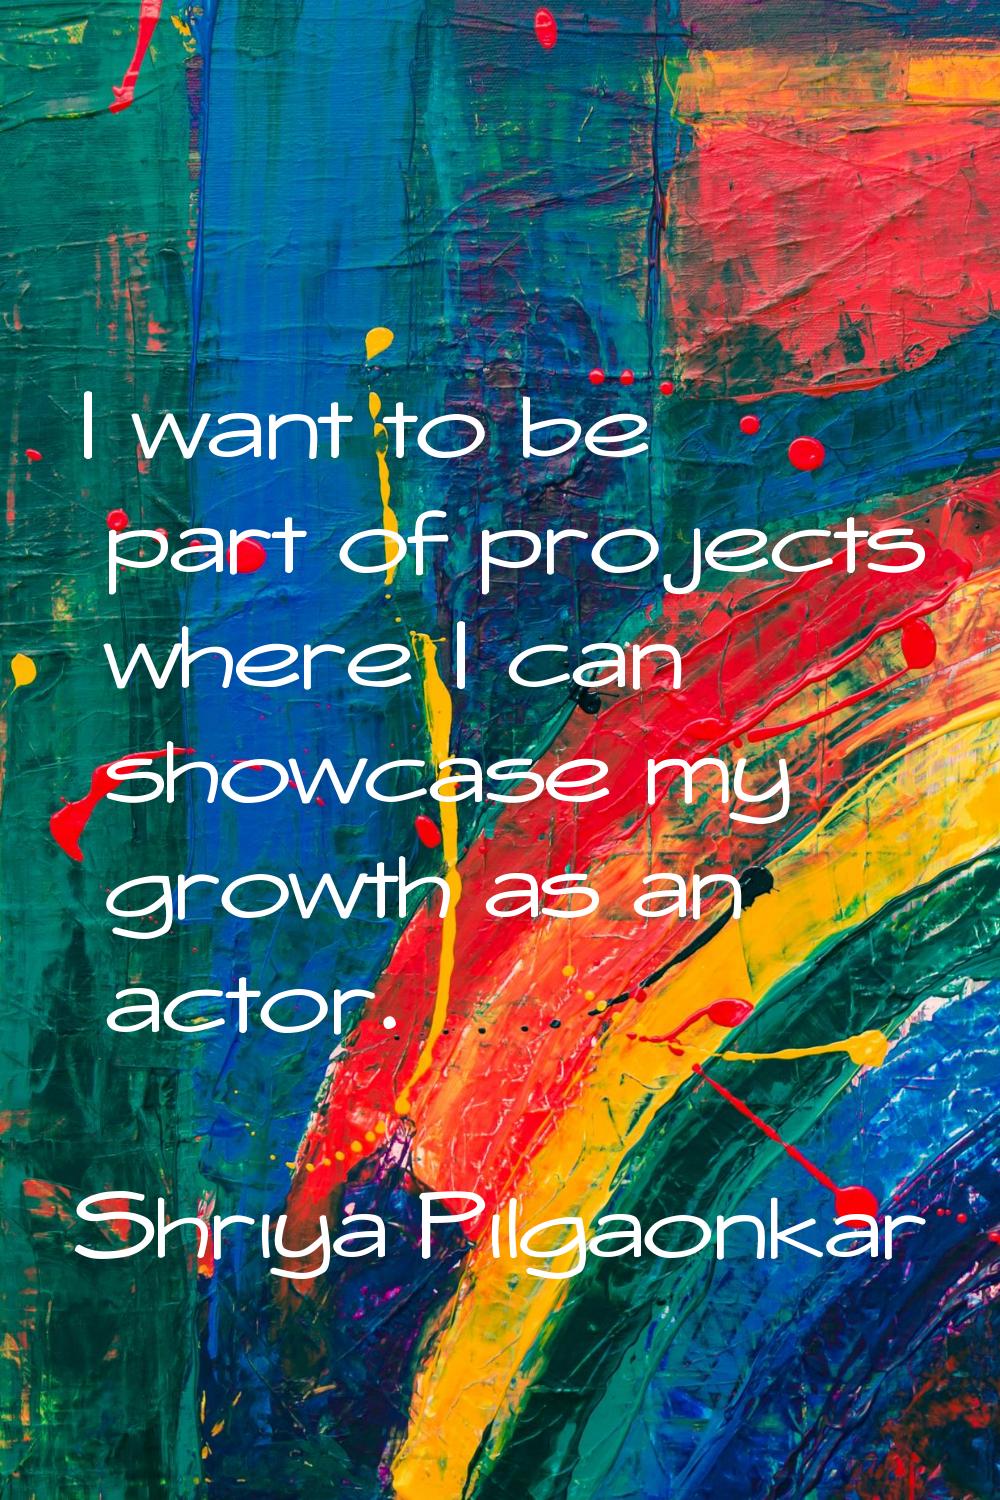 I want to be part of projects where I can showcase my growth as an actor.